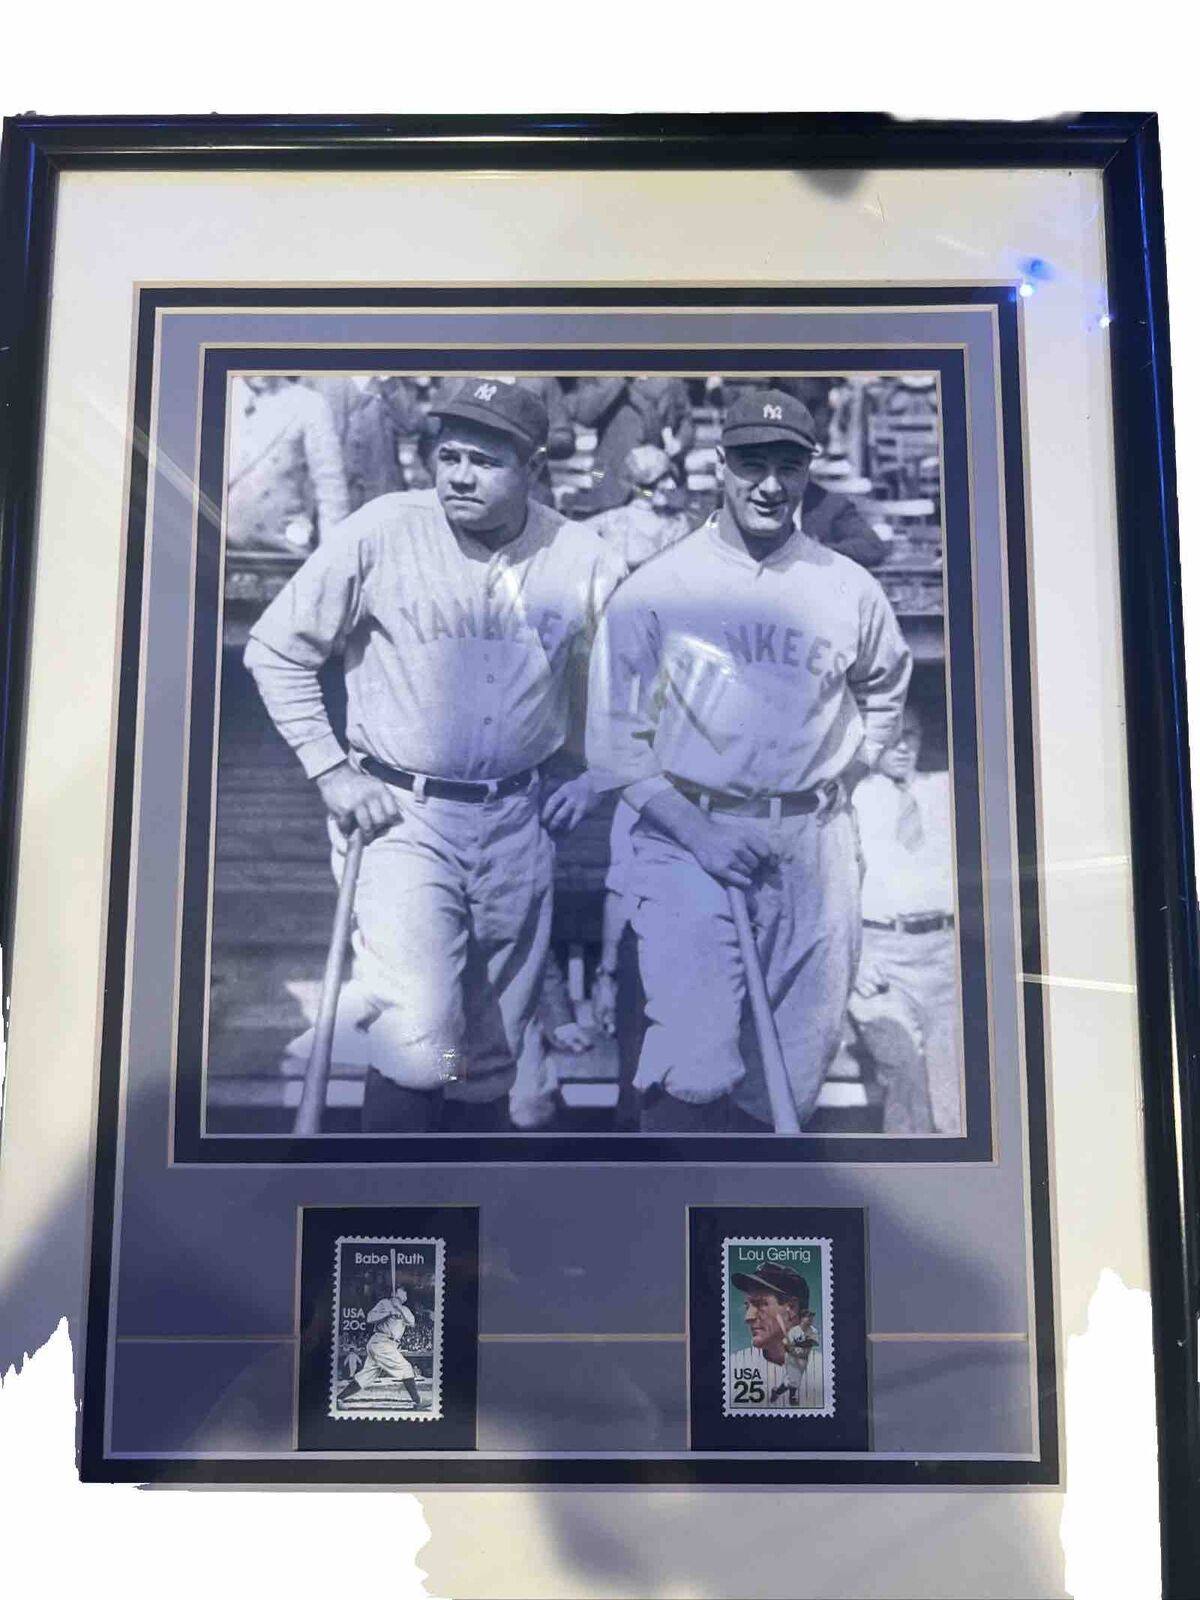 Yankees Babe Ruth & Lou Gehrig Photo & Postage Stamps in Picture Frame  